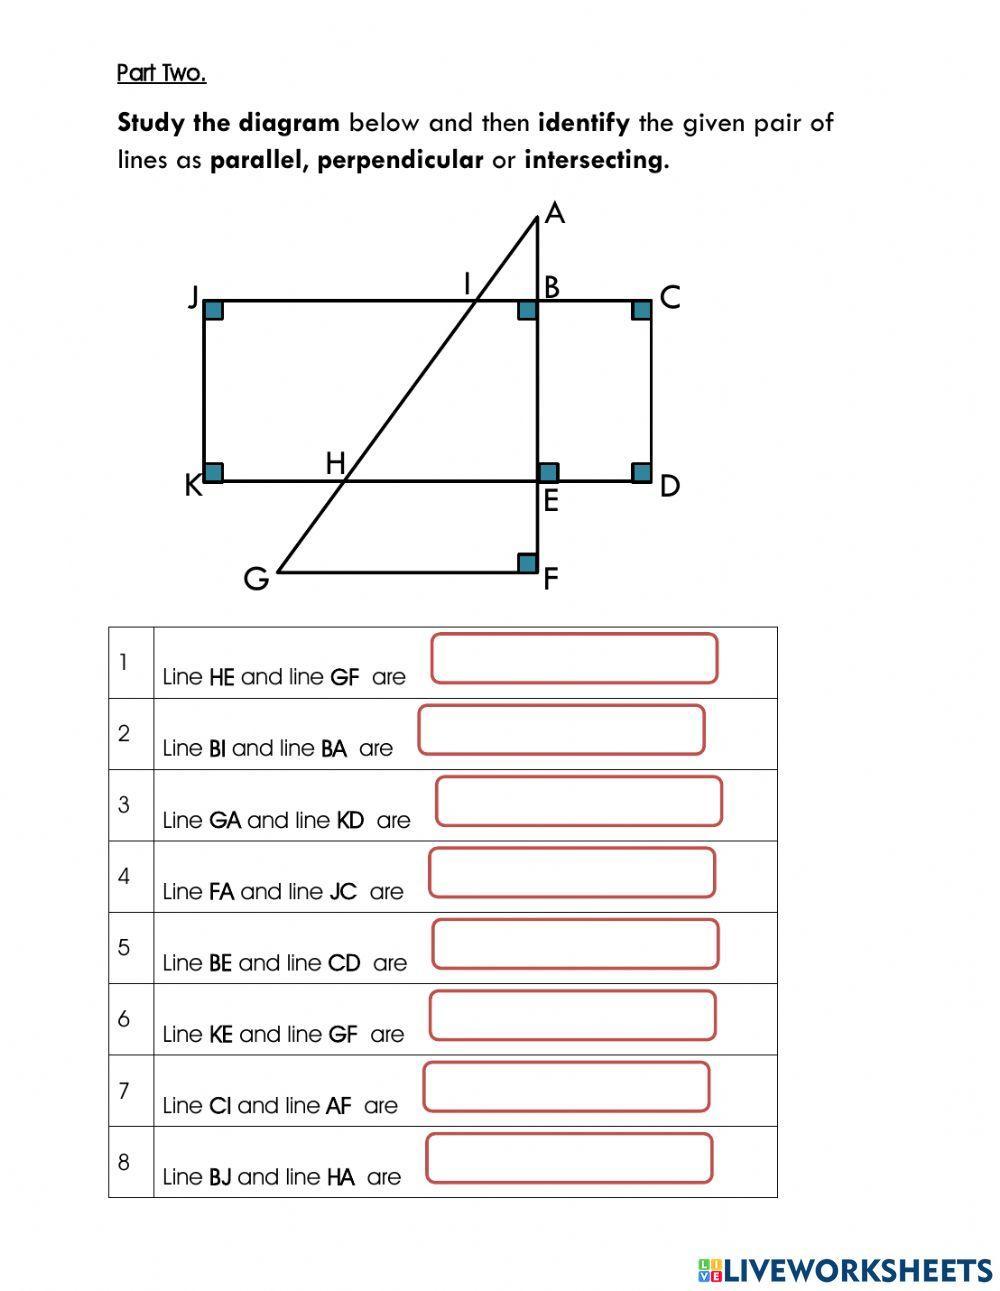 Parallel, Perpendicular and intersecting lines